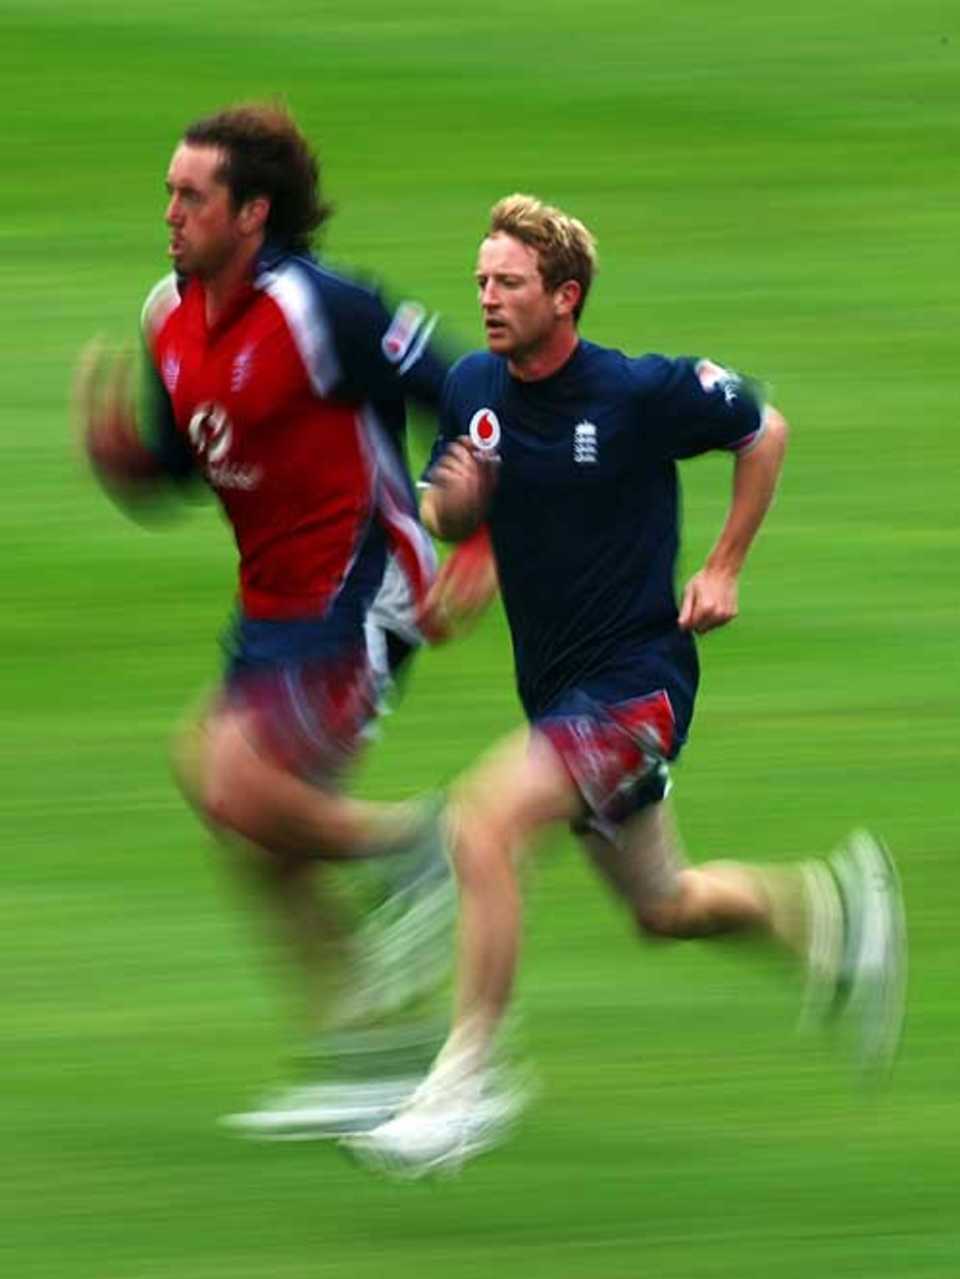 Ryan Sidebottom and Paul Collingwood test out their hamstring injuries